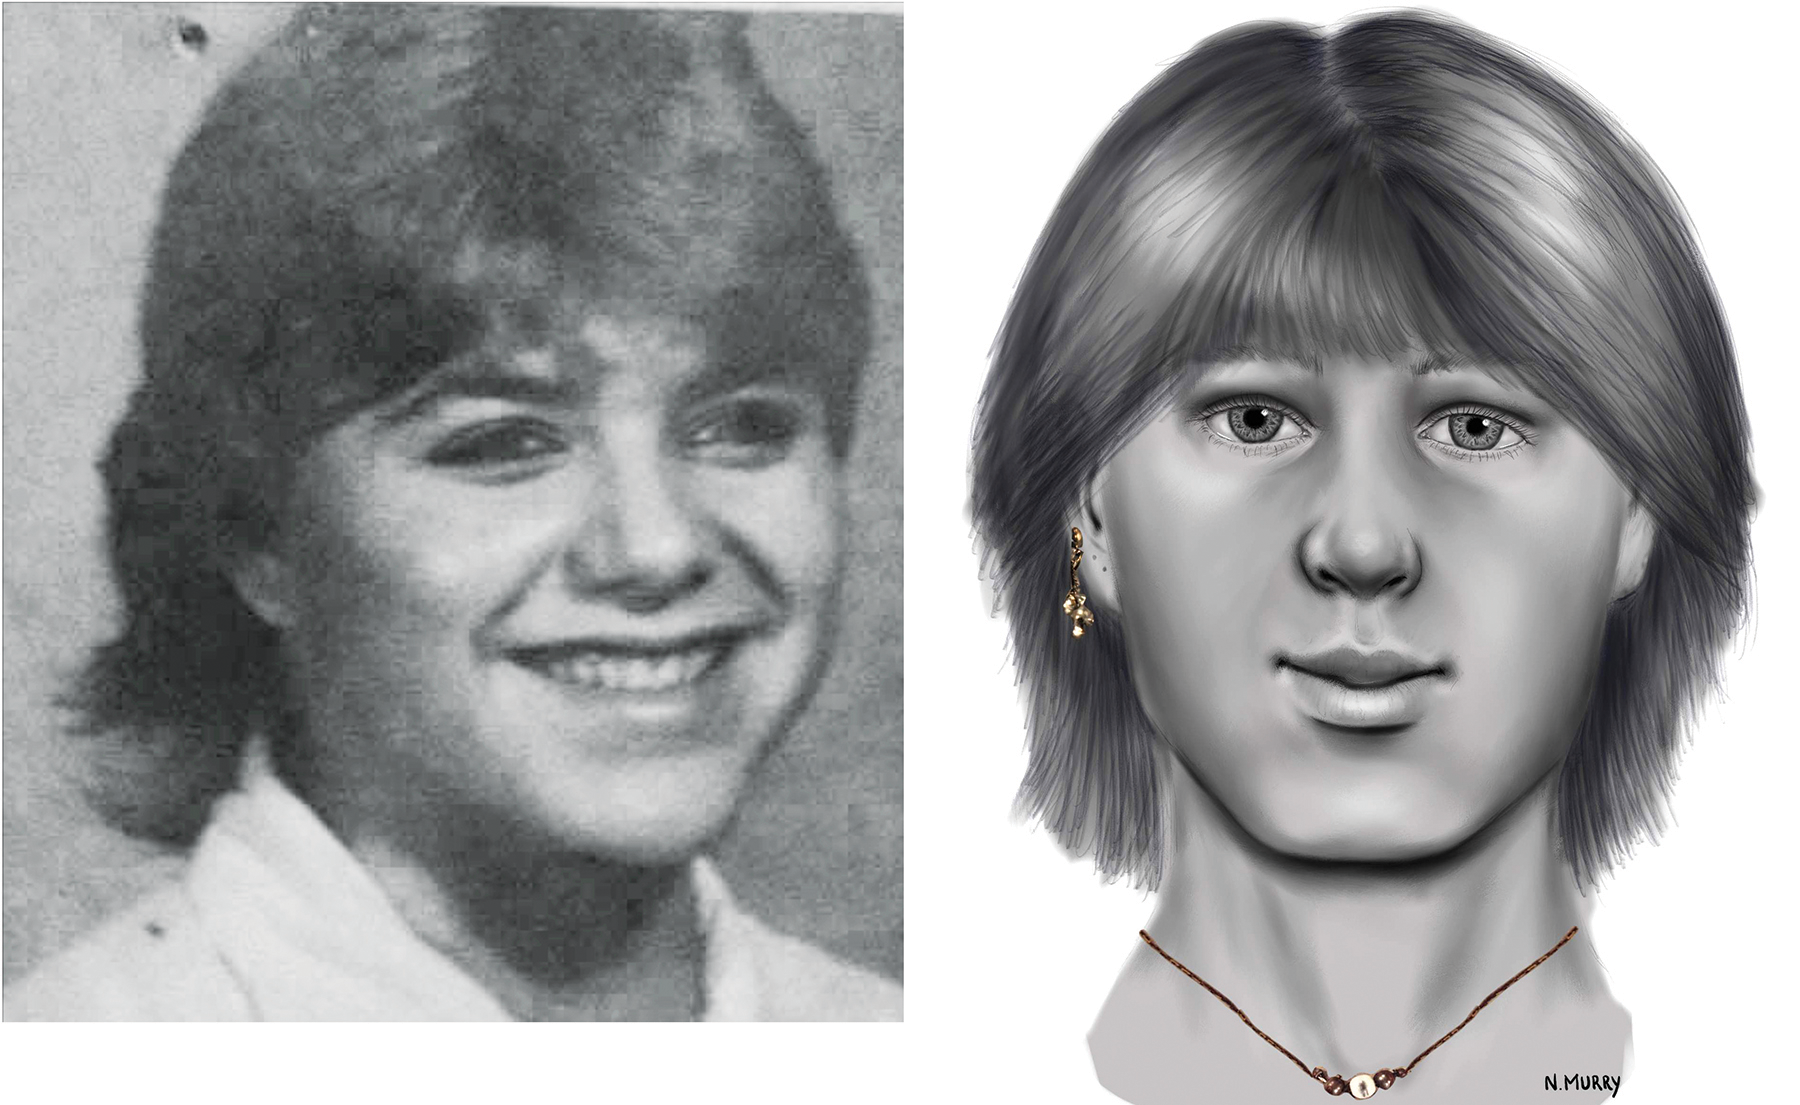 Another Williamson County murder victim, called “Corona Girl,” was finally identified in 2020 as Sue Ann Huskey.